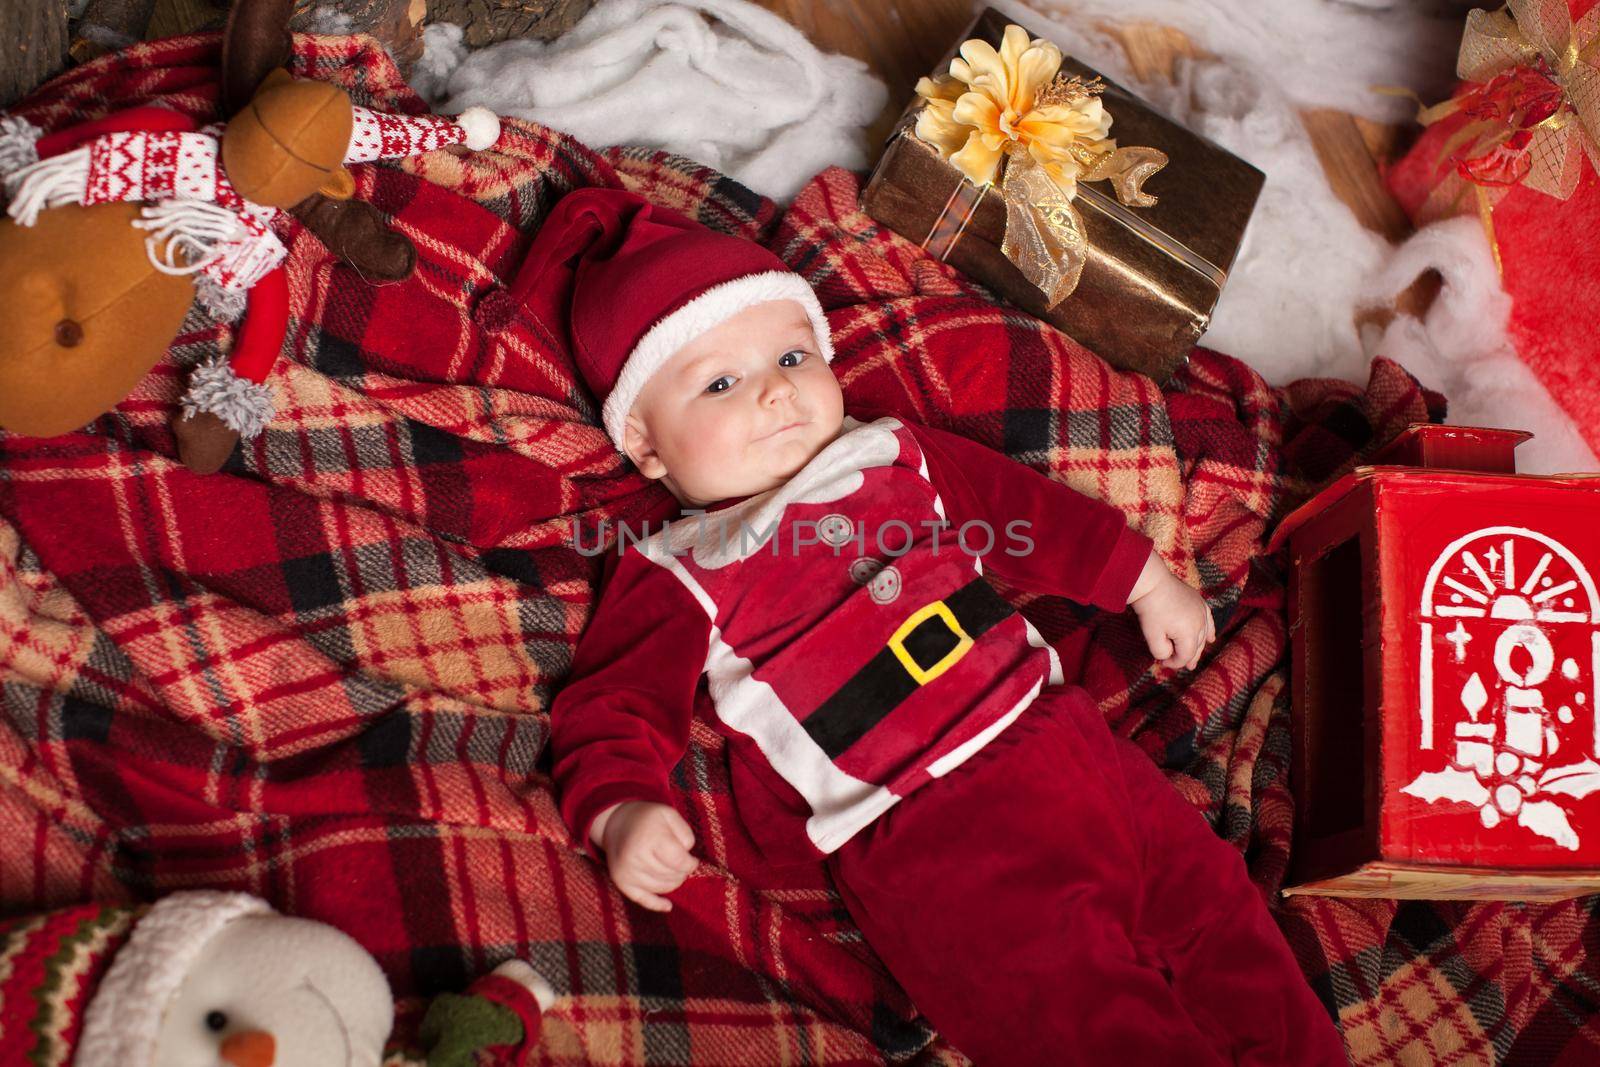 A child in Santa Claus costume rests on a red plaid surrounded by toys